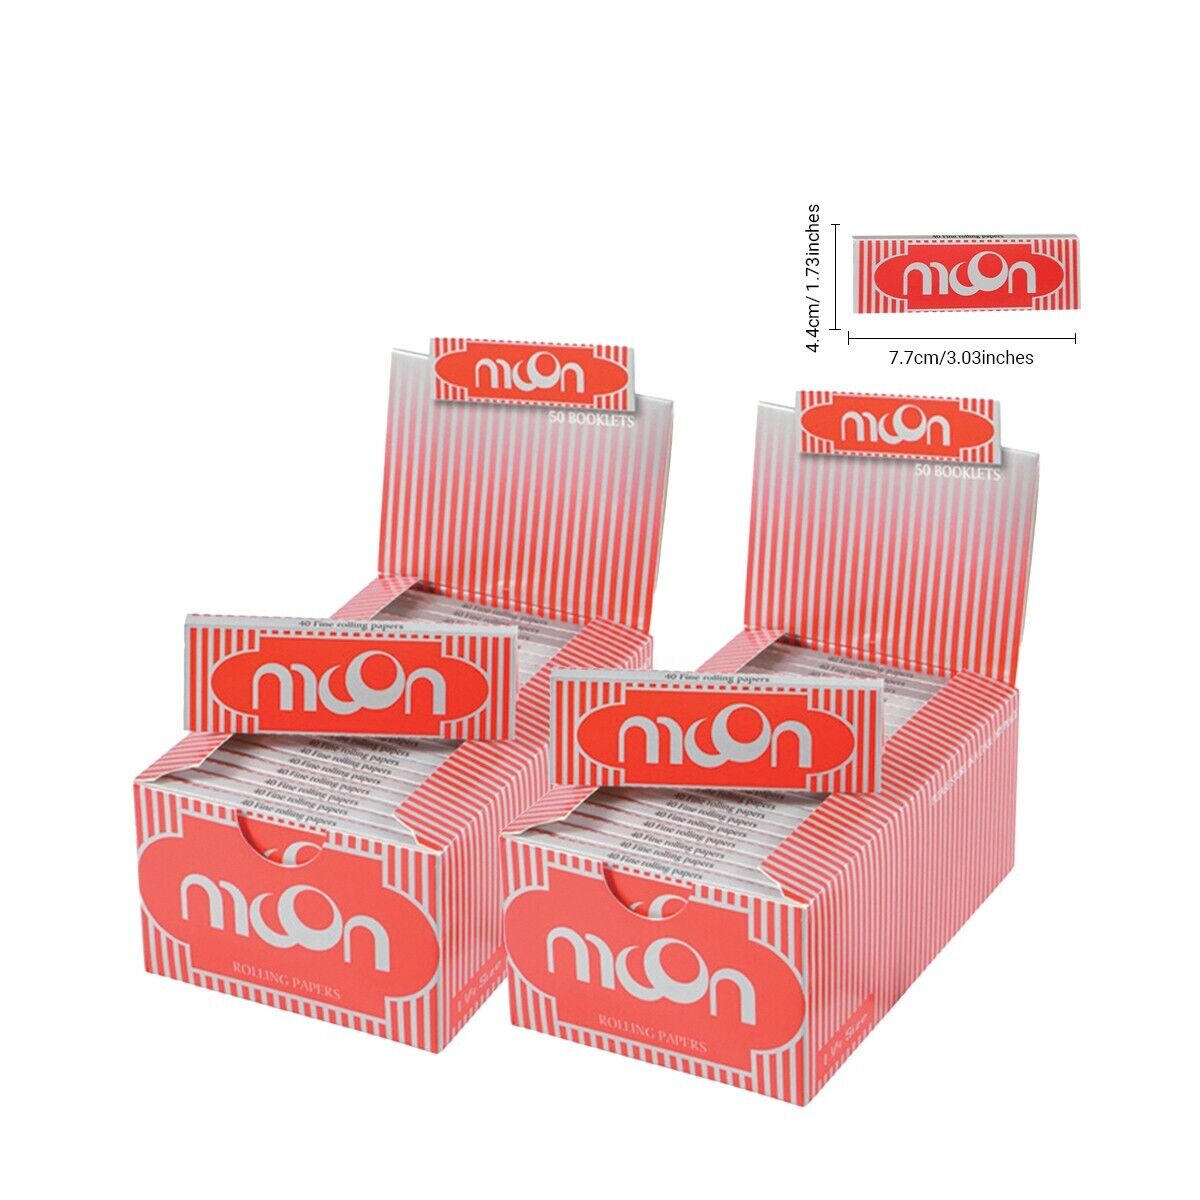 2 Box 50 Booklets Moon Red 1 1/4 Size Rolling Paper Full Box 77 mm Smoking Paper